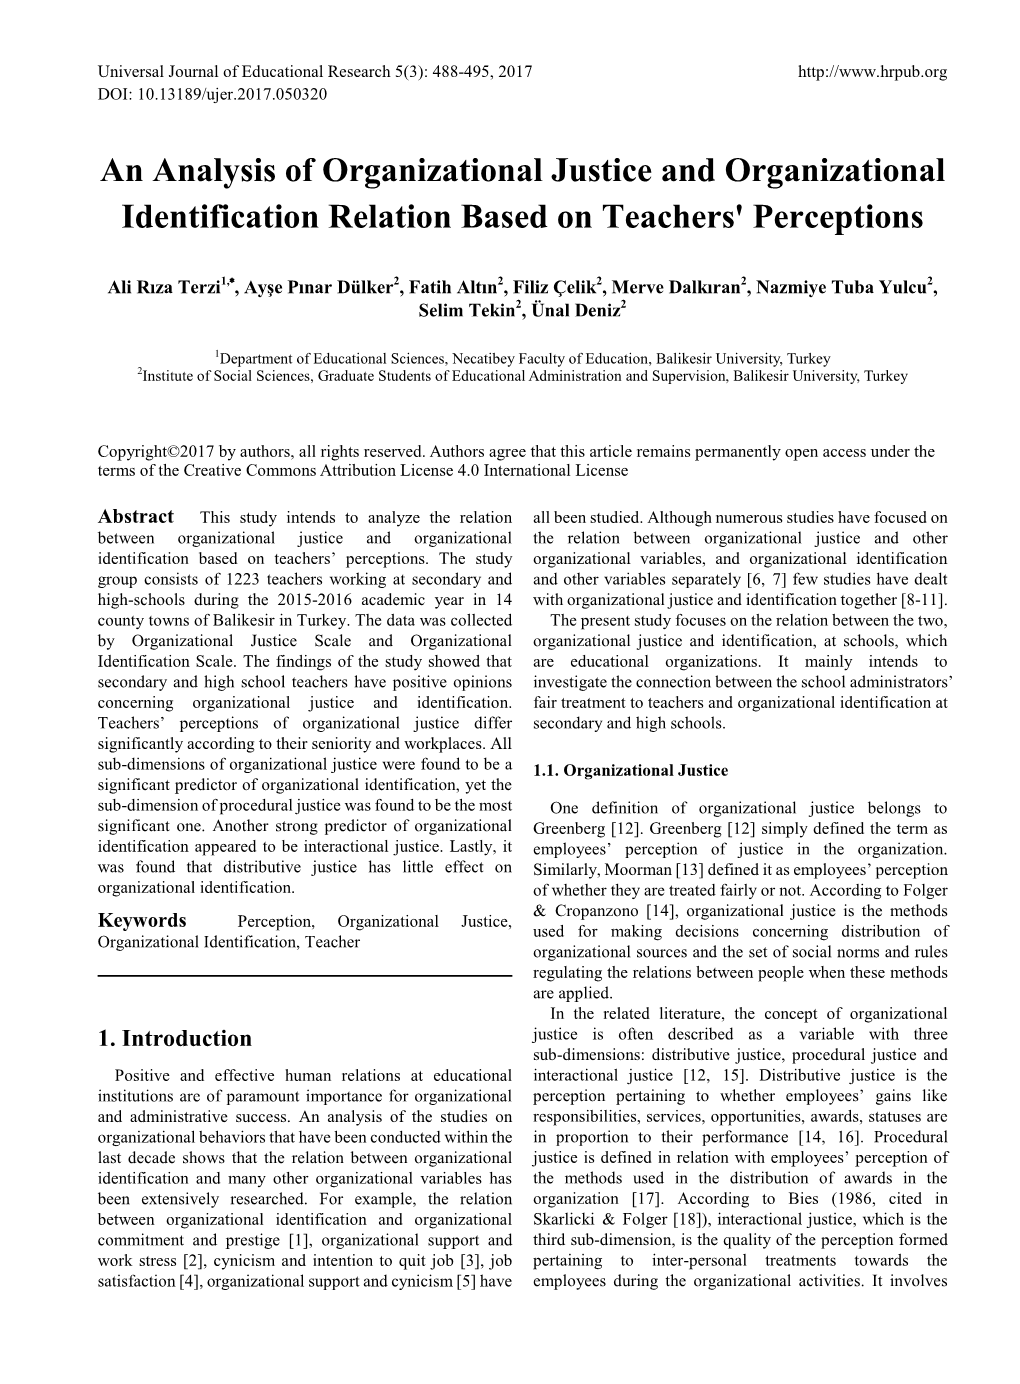 An Analysis of Organizational Justice and Organizational Identification Relation Based on Teachers' Perceptions